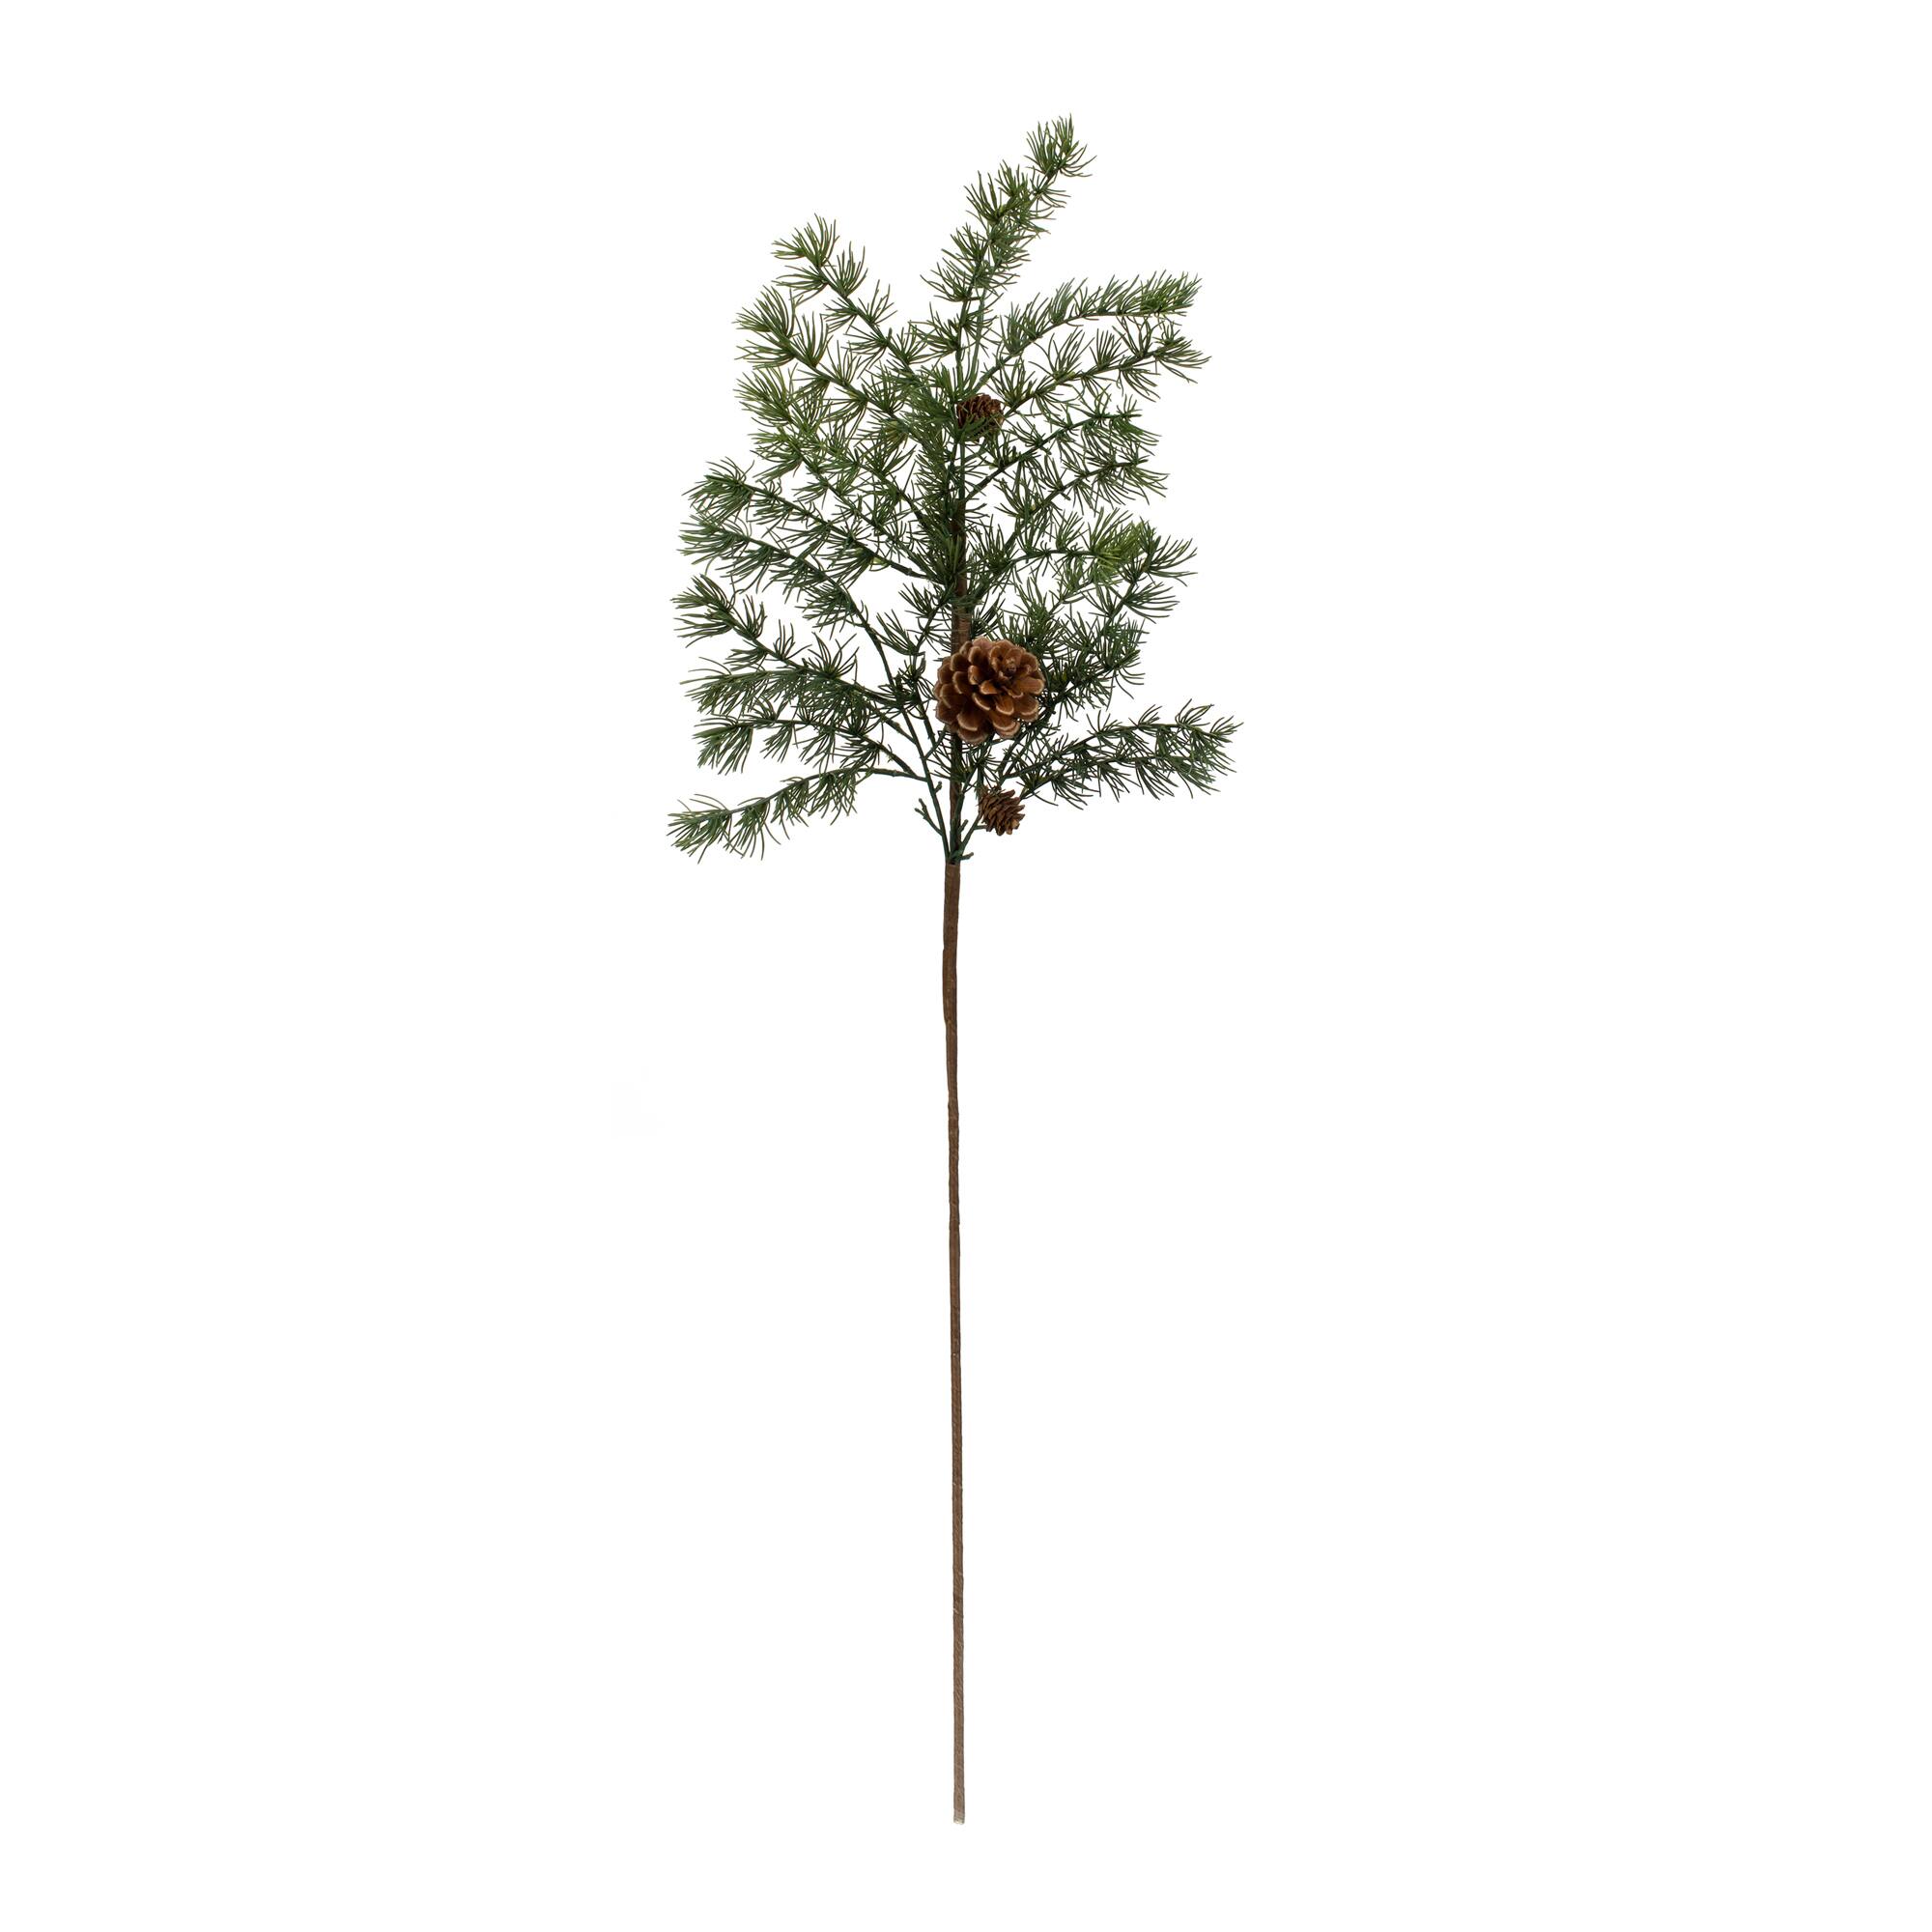 White Holly Berry Stems with 35 Lifelike Berries